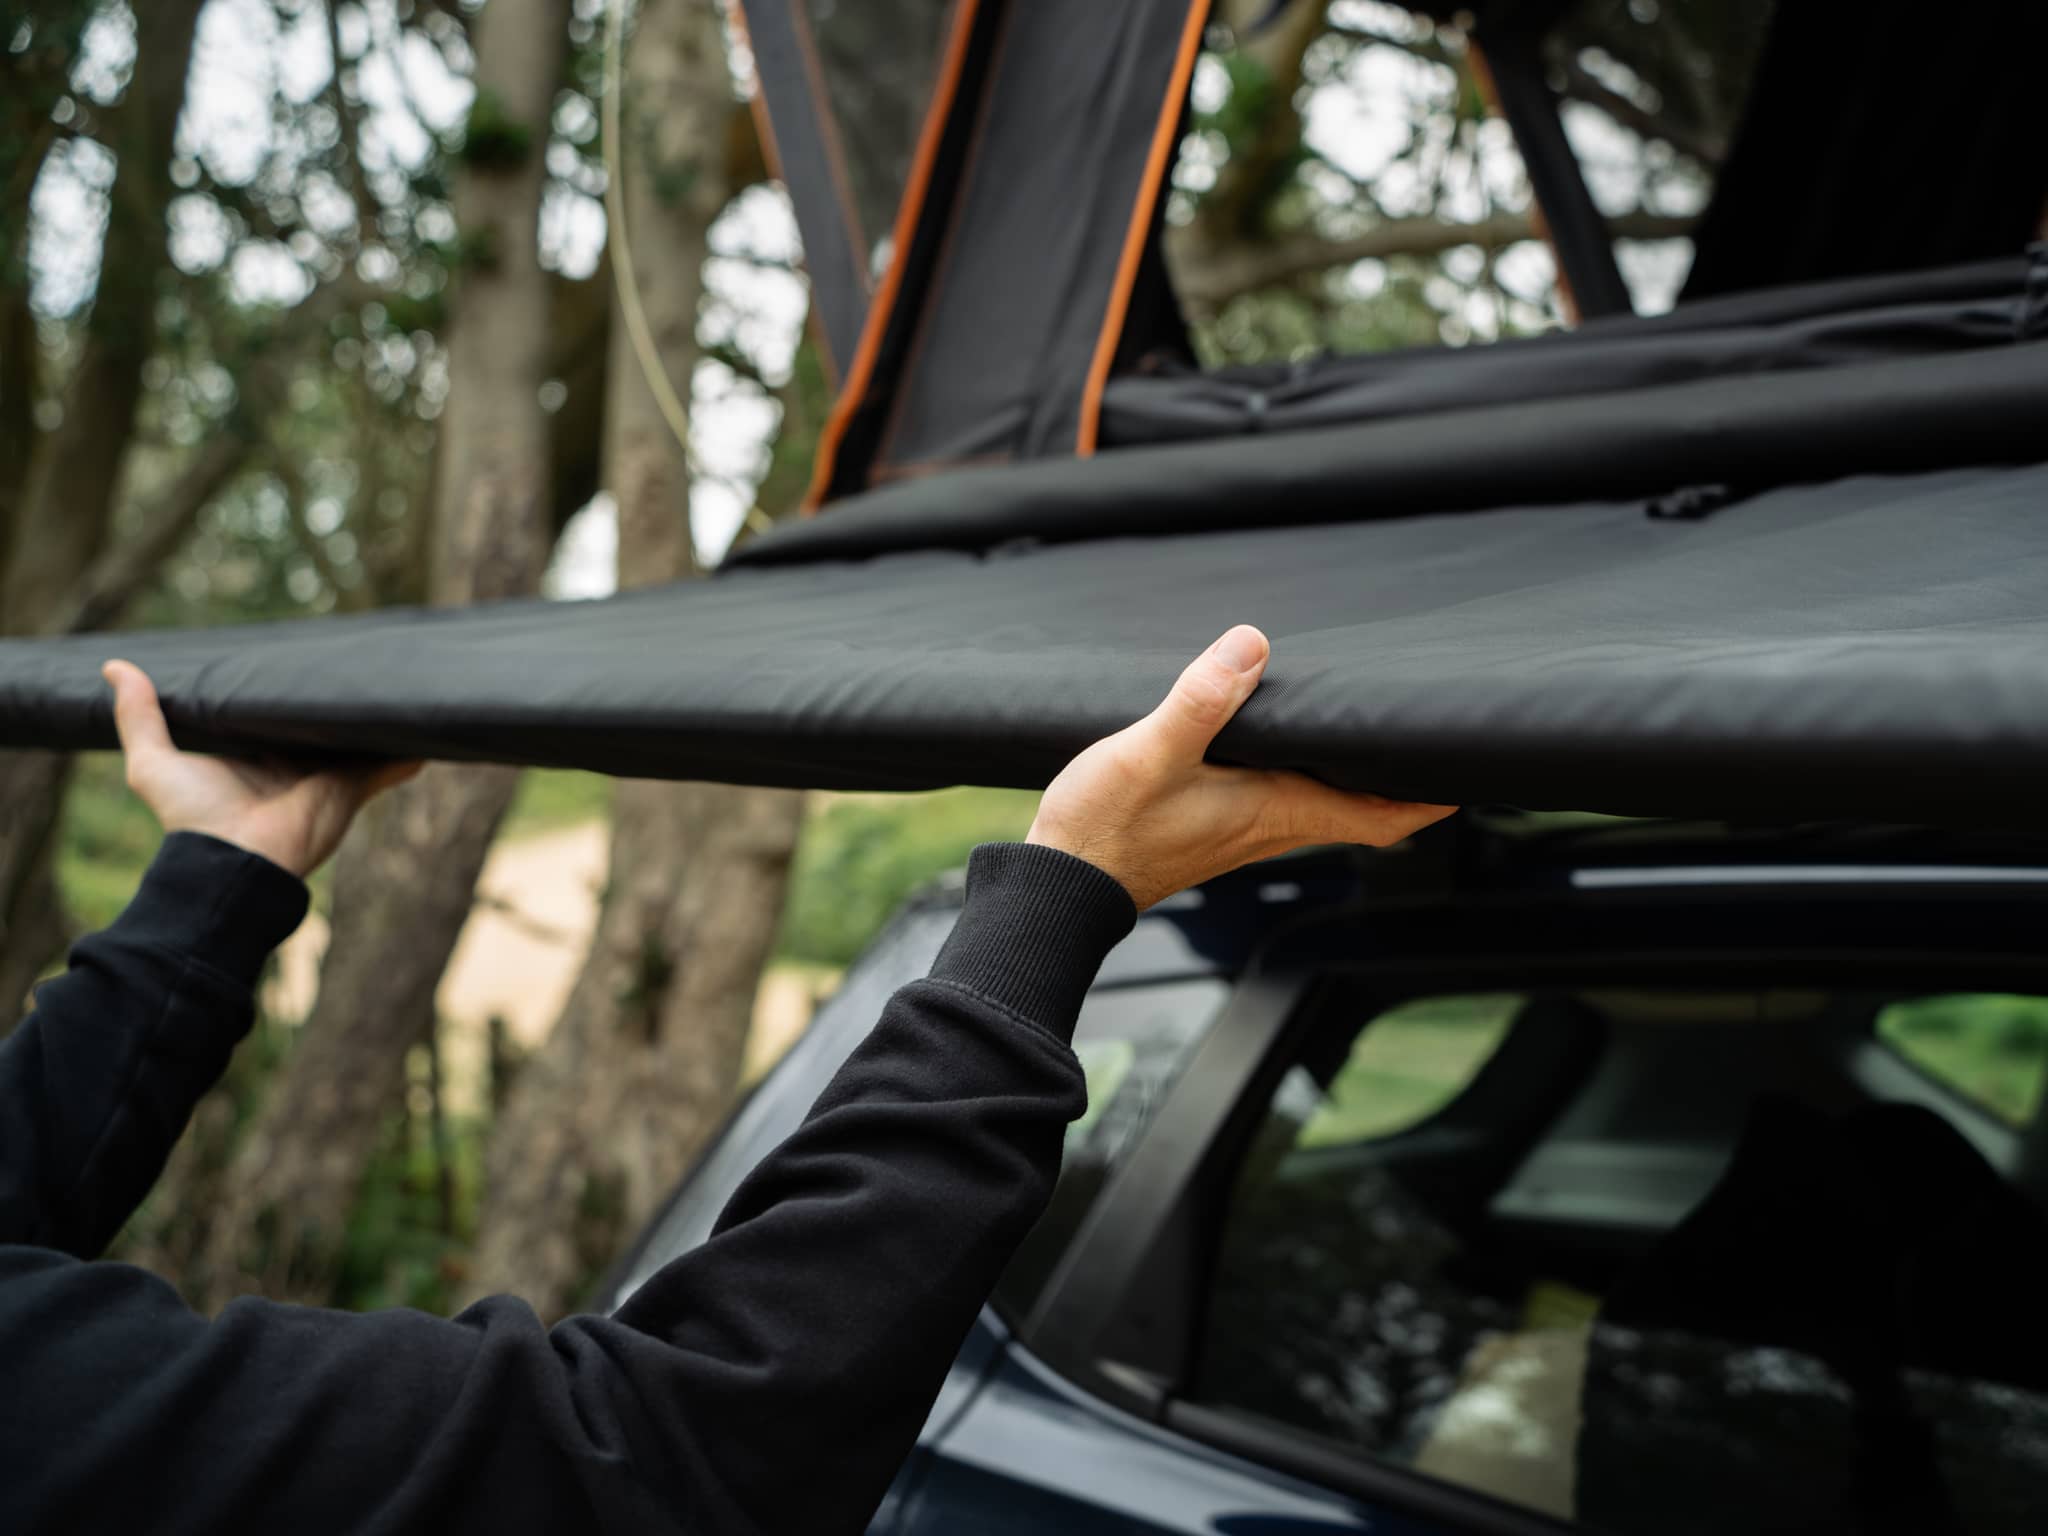 TentBox Univeral Side Awning - Awning for the car 